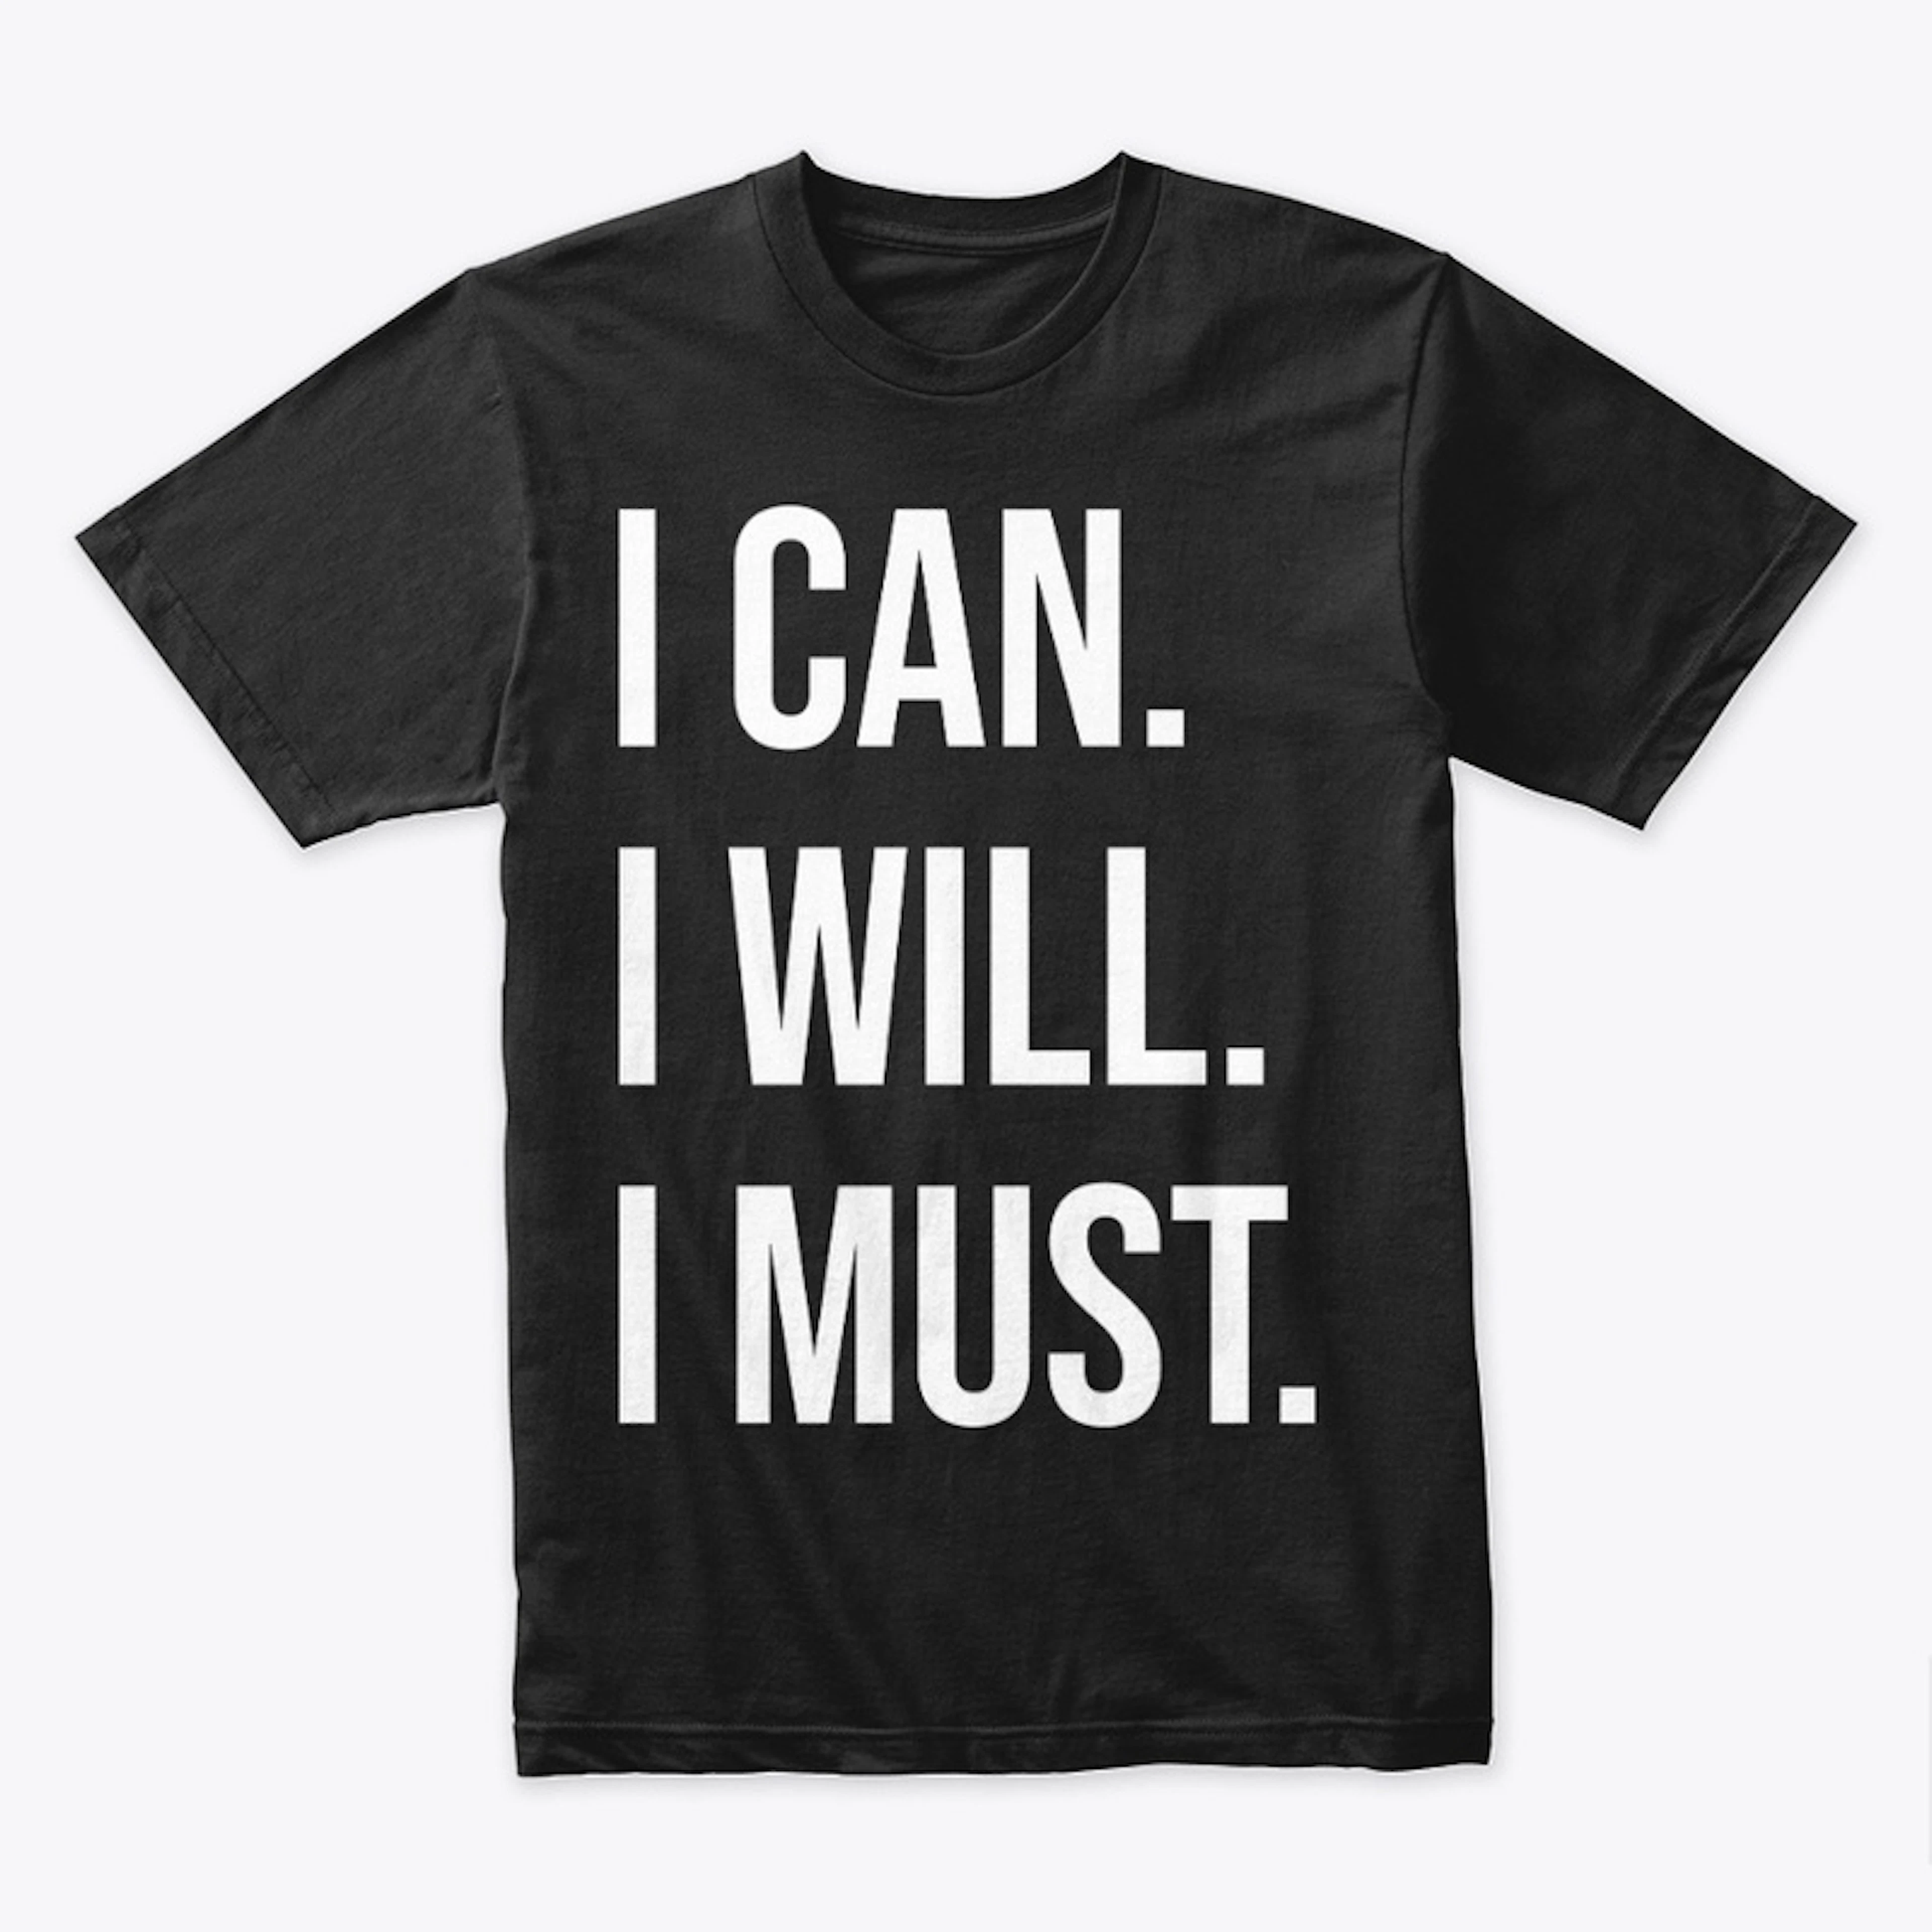 I CAN. I WILL. I MUST.